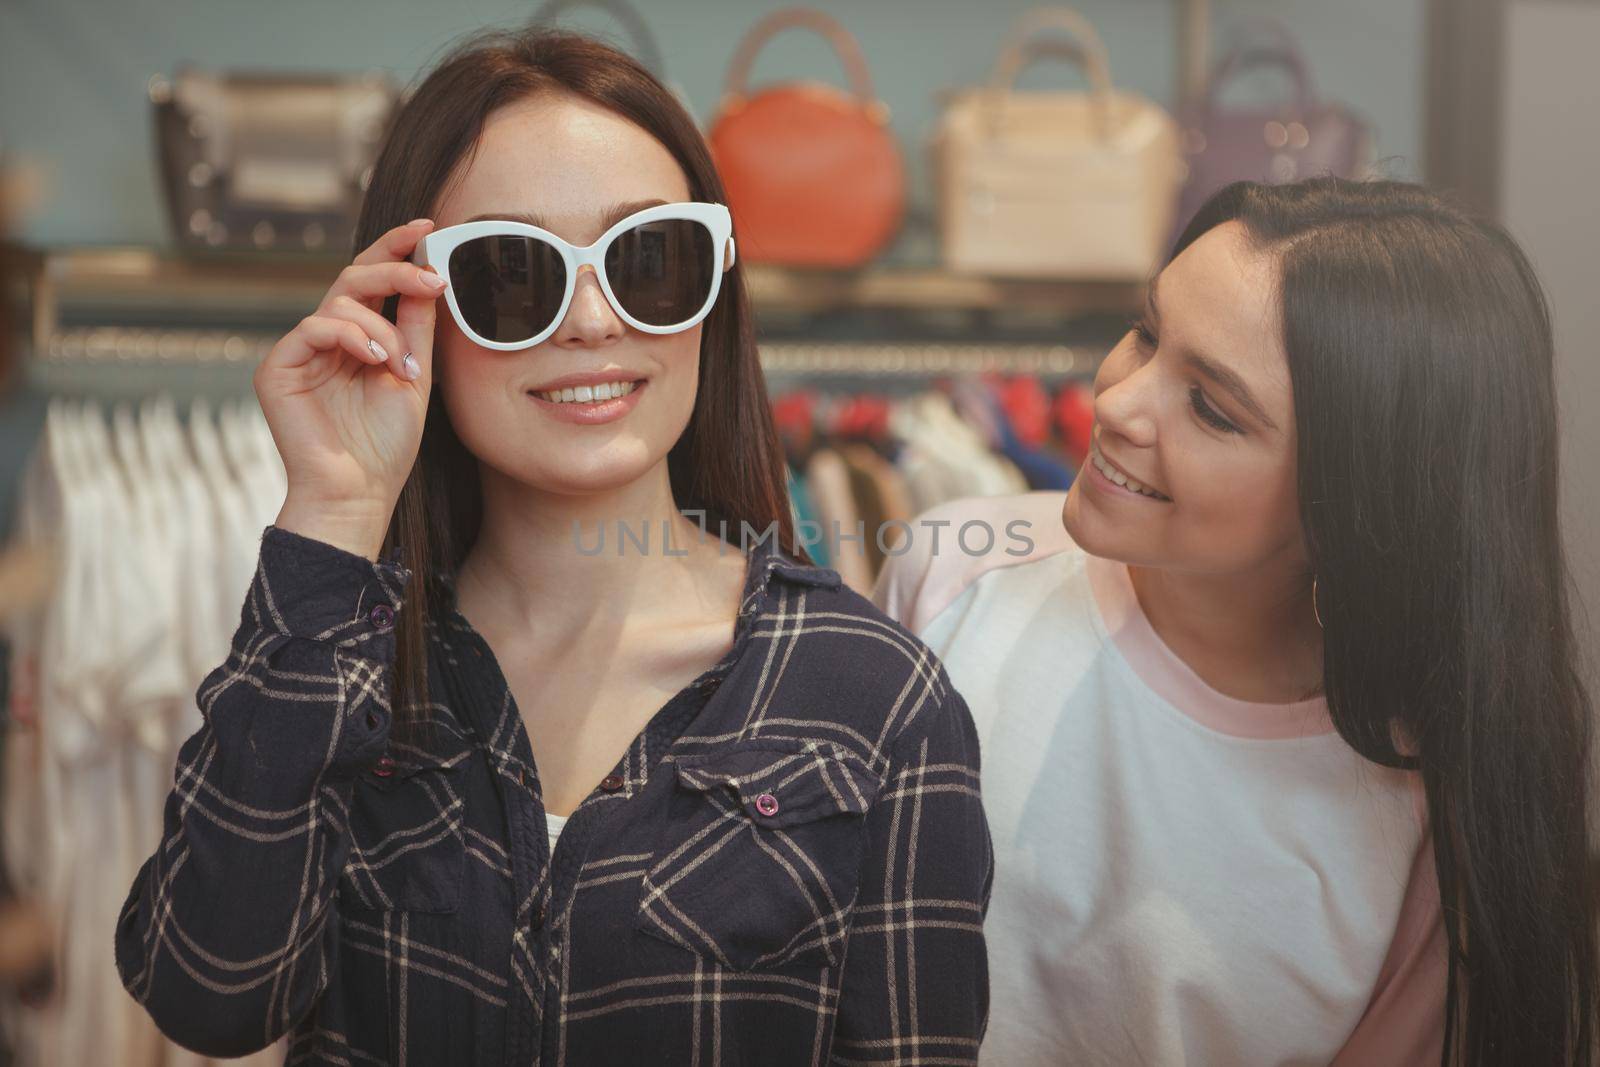 Beautiful woman smiling, trying on new sunglasses, shile shopping with her best friend. Two lovely young women enjoying shopping for eyewear together. Friendship, lifestyle concept